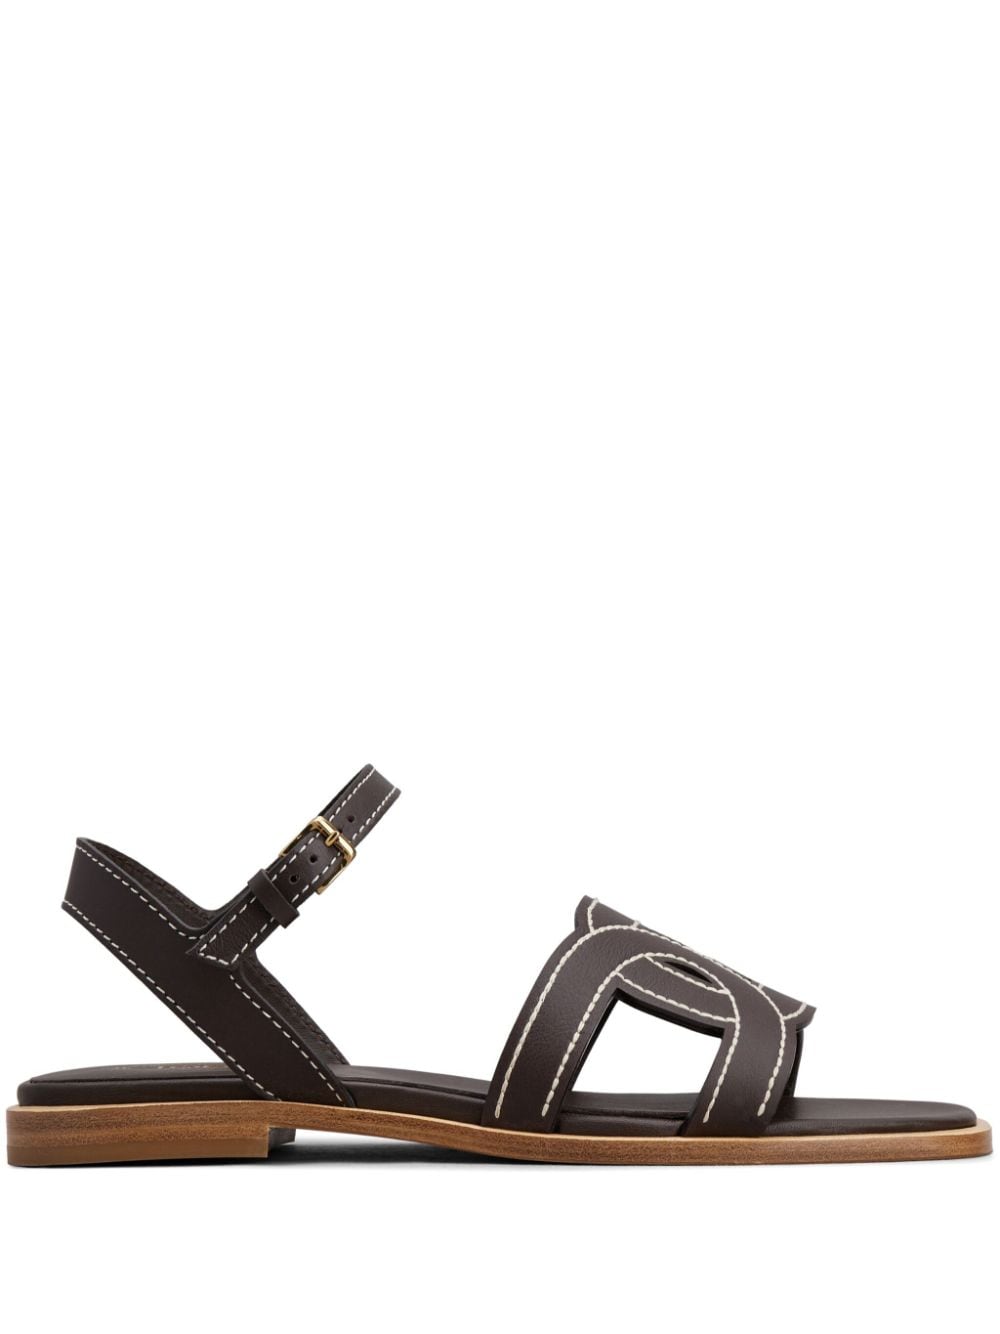 Tod's Kate leather sandals - Black von Tod's